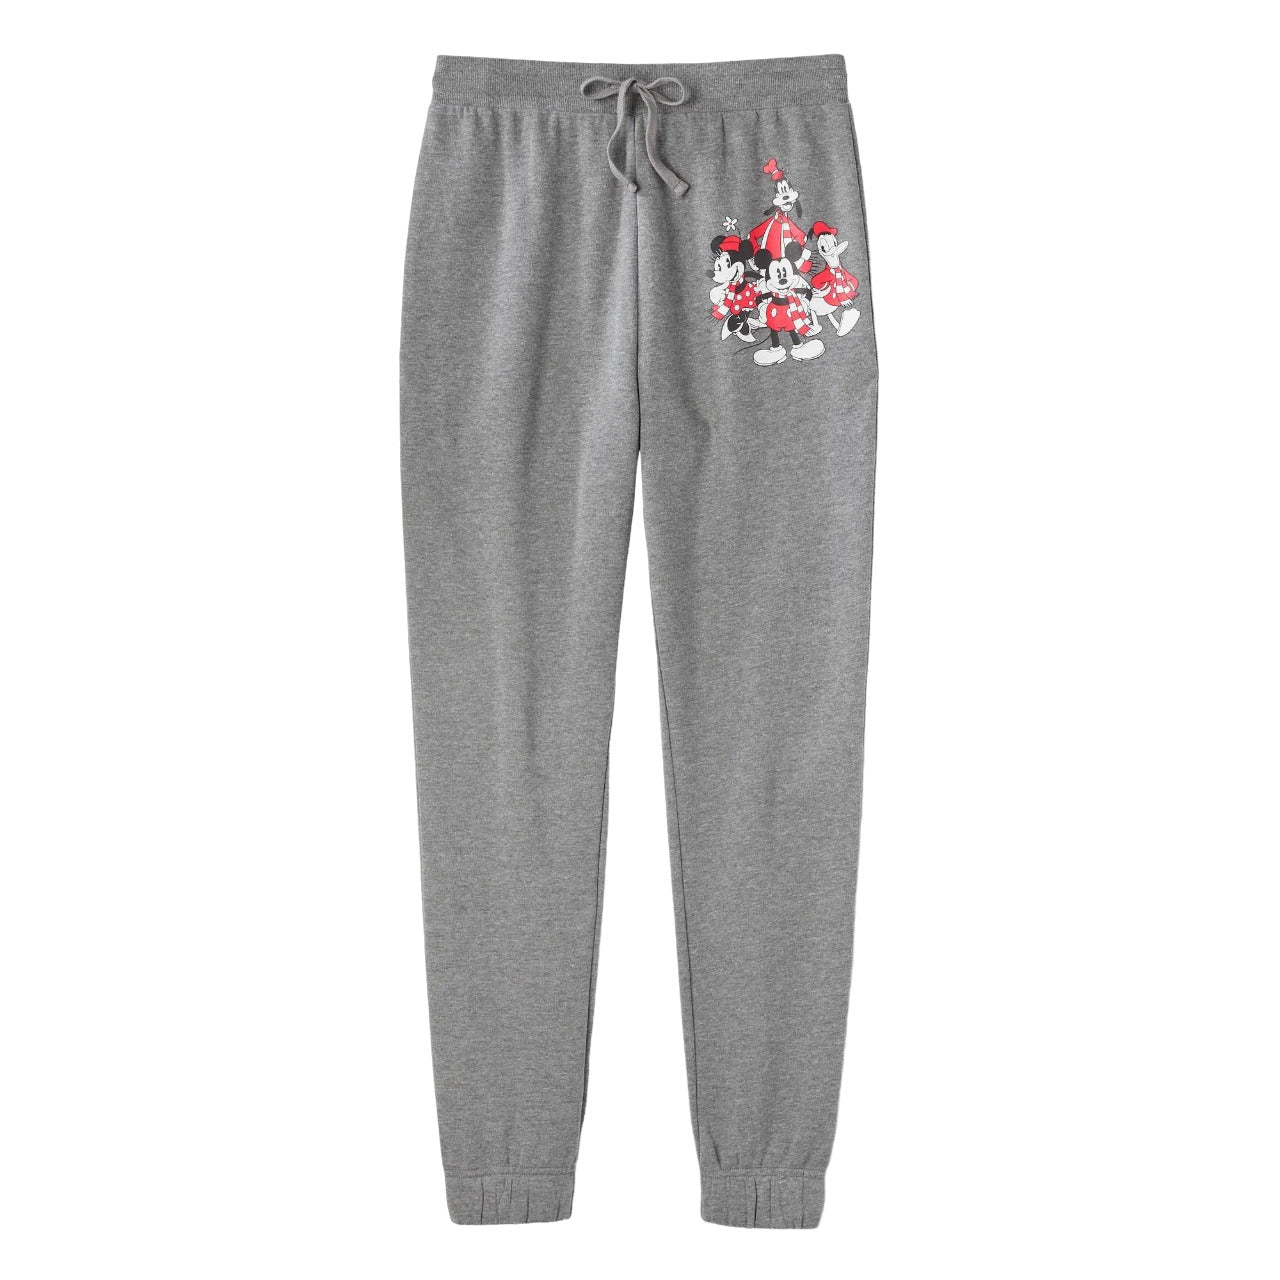 Adult Disney Mickey Mouse Graphic Jogger Pants - Charcoal Gray L